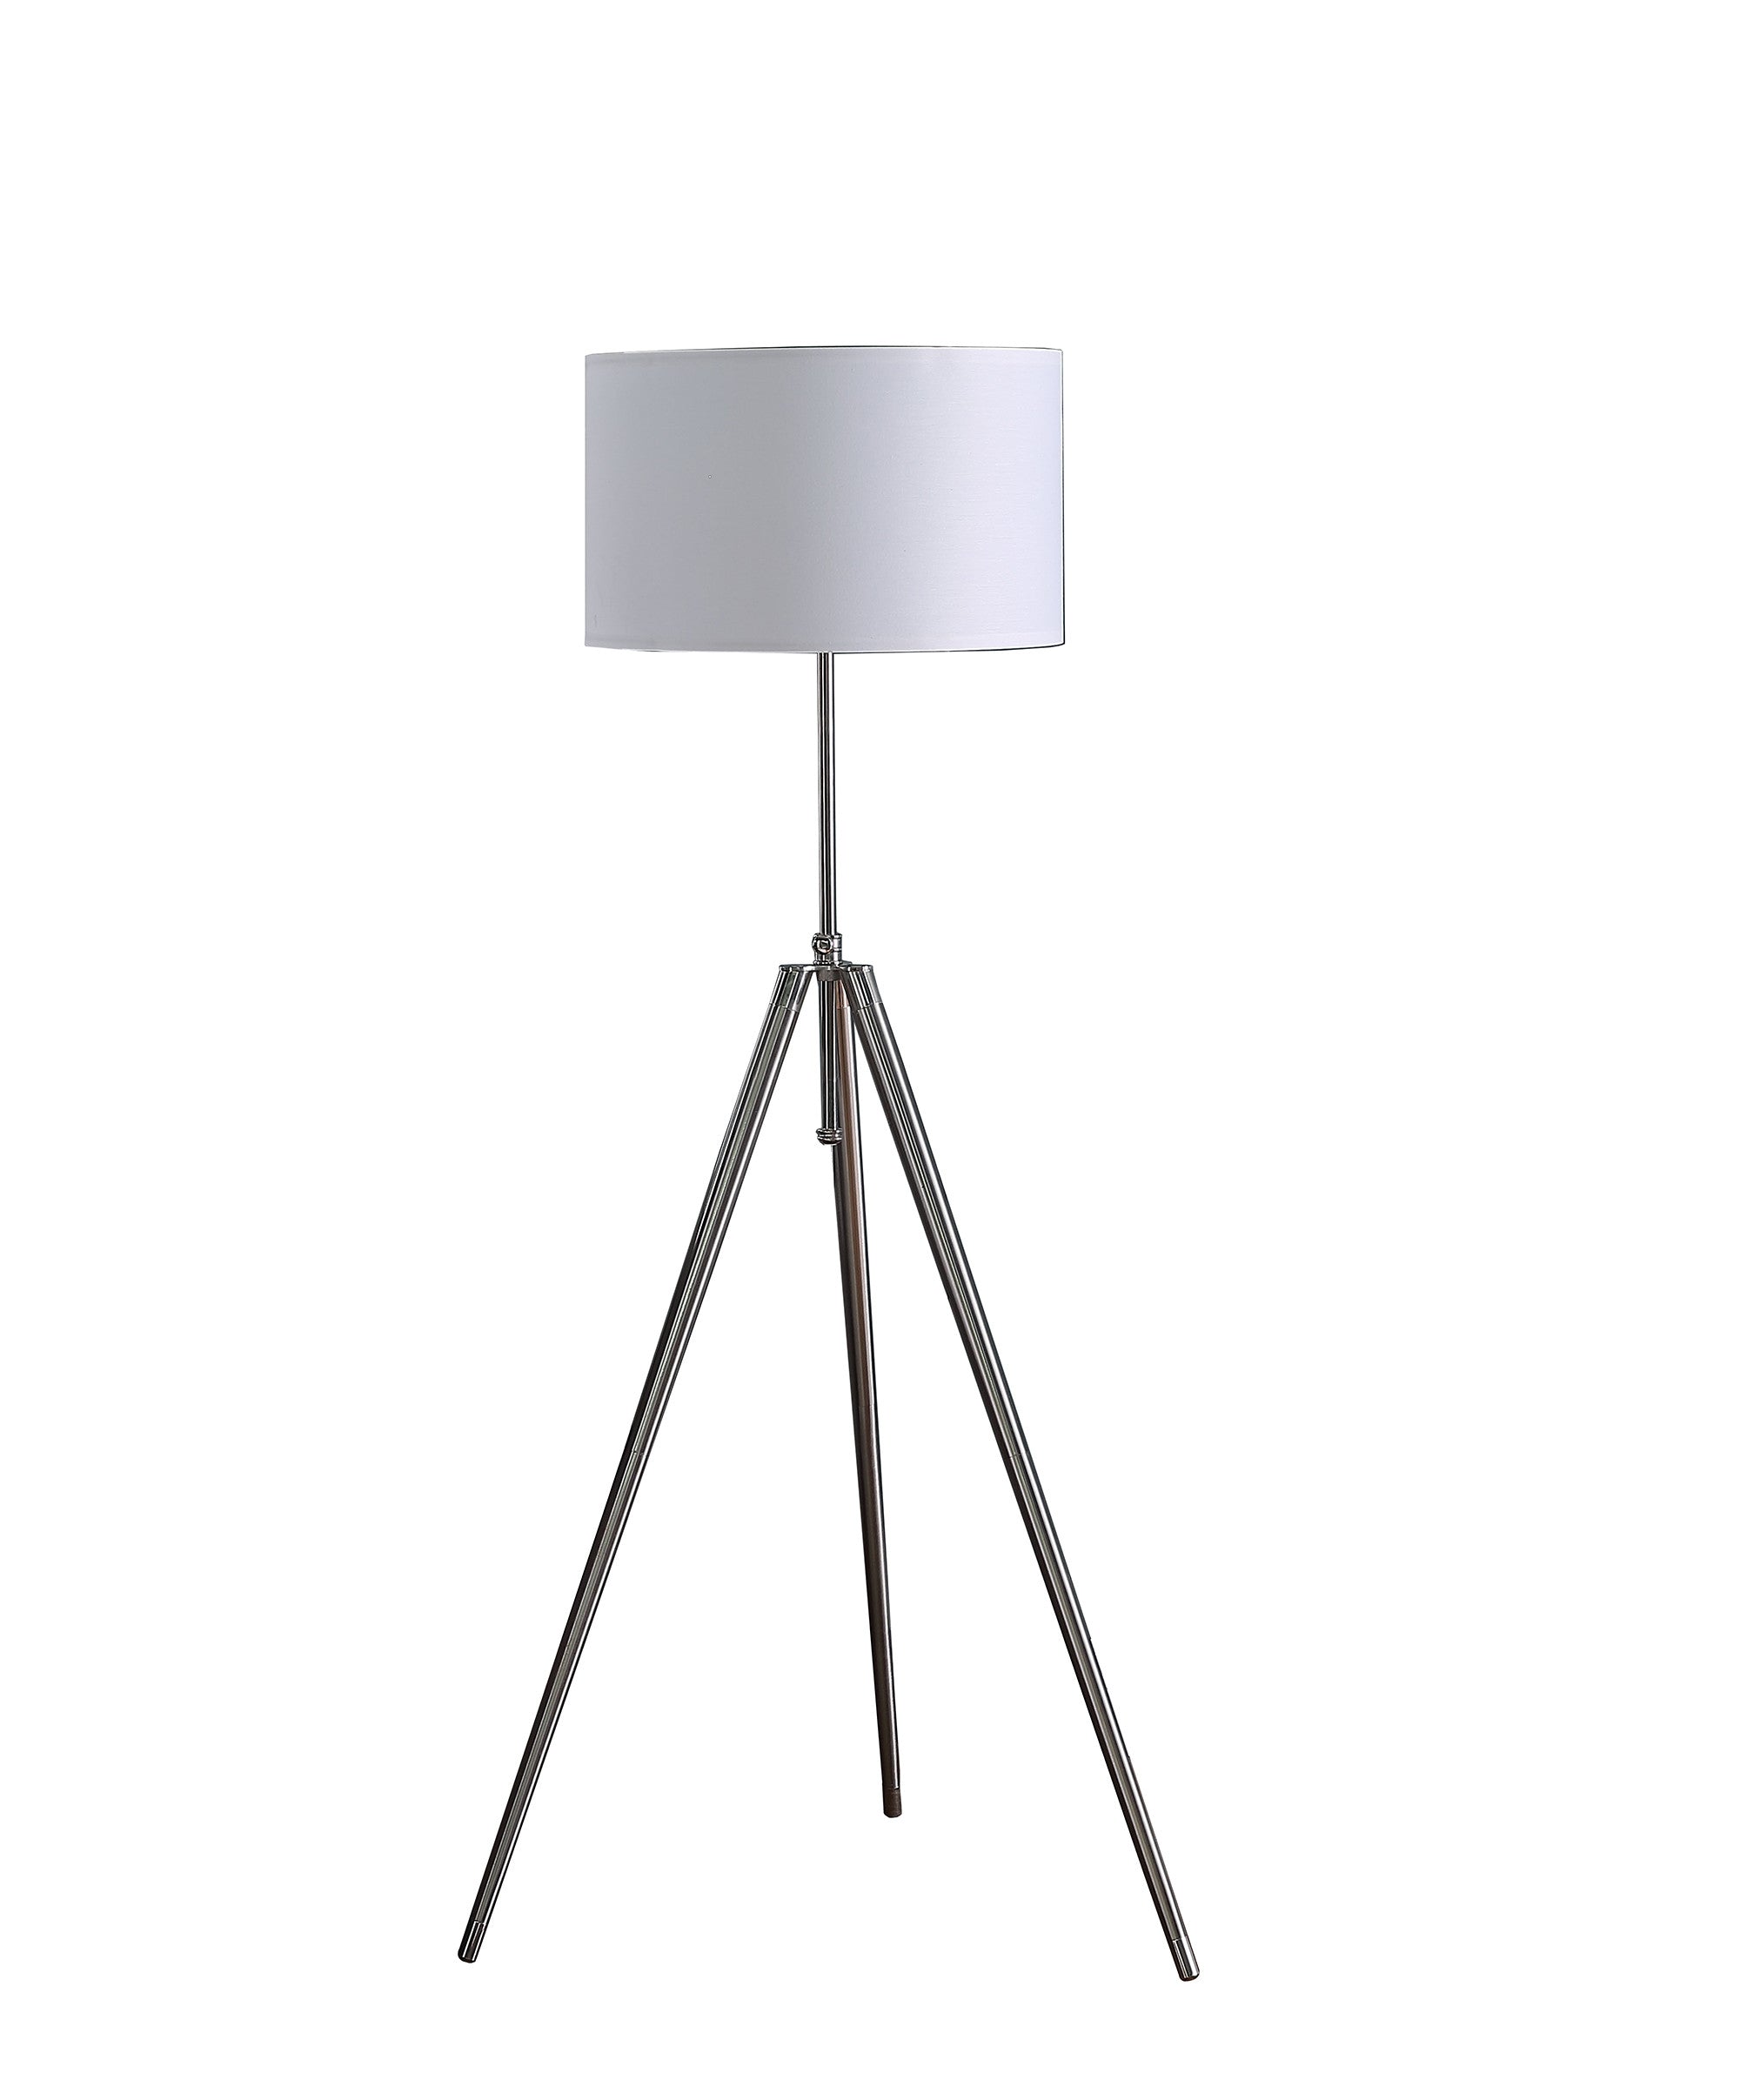 64" Chrome Adjustable Tripod Floor Lamp With White Shade